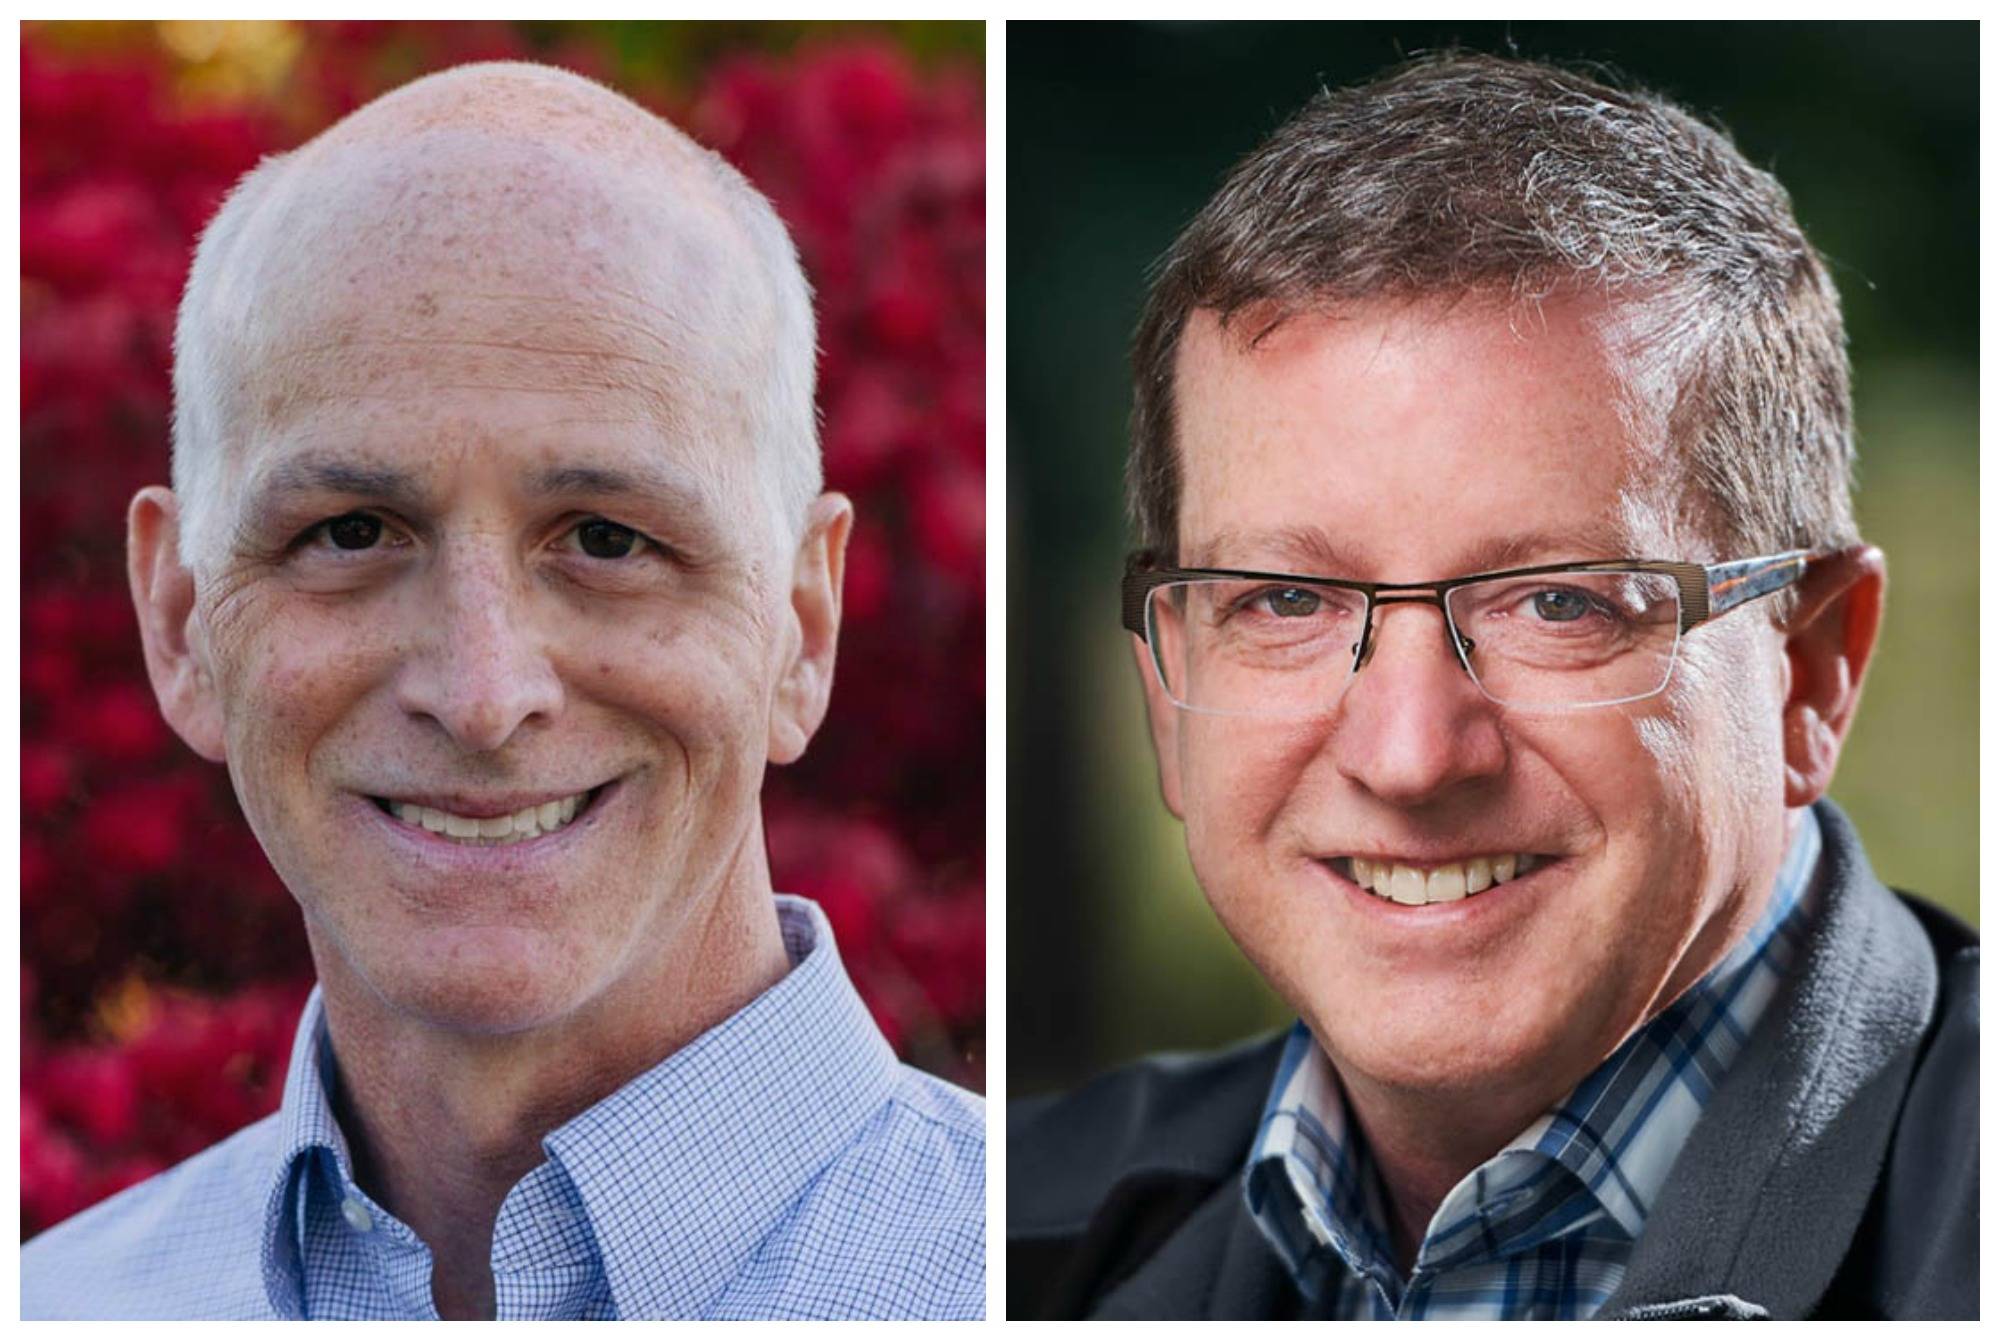 Adam Smith, left, and Doug Basler. Photos from the King County Elections site